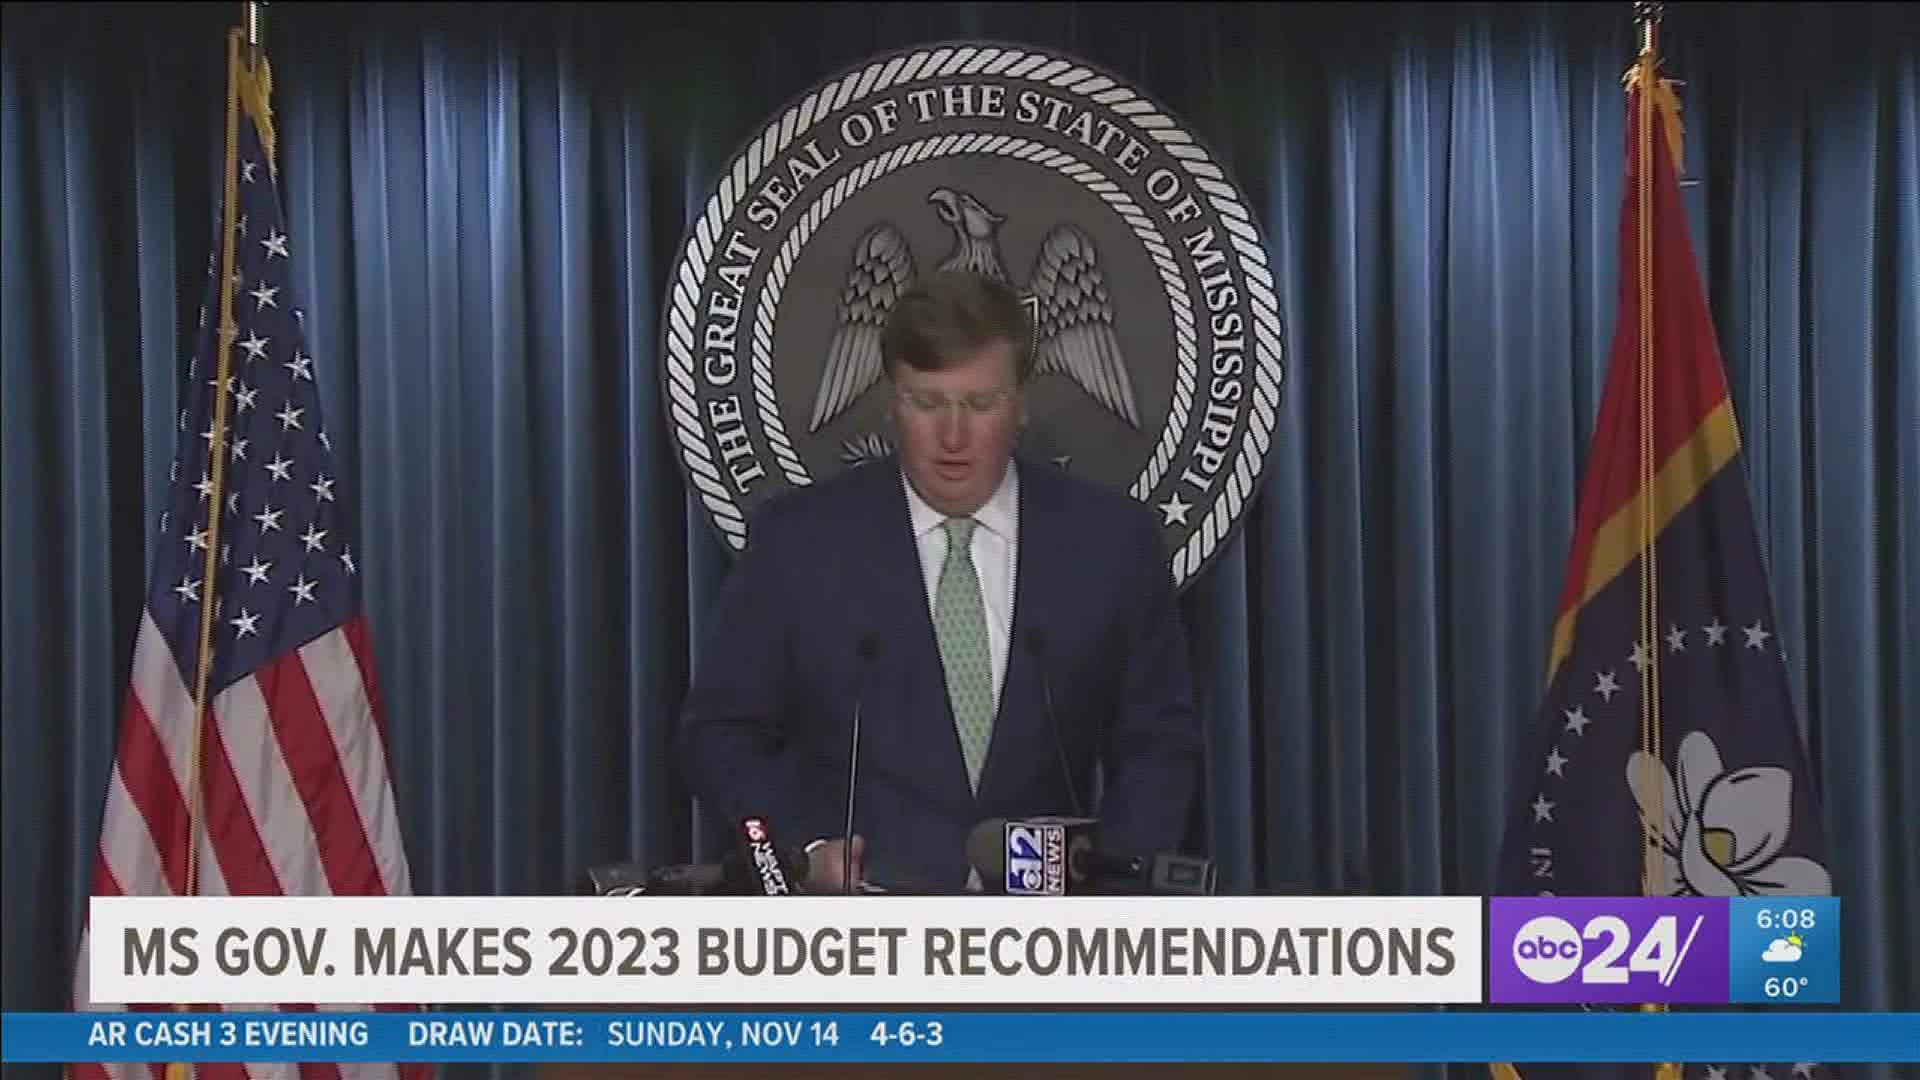 Reeves released his Executive Budget Recommendations for the 2023 Fiscal Year Monday morning.